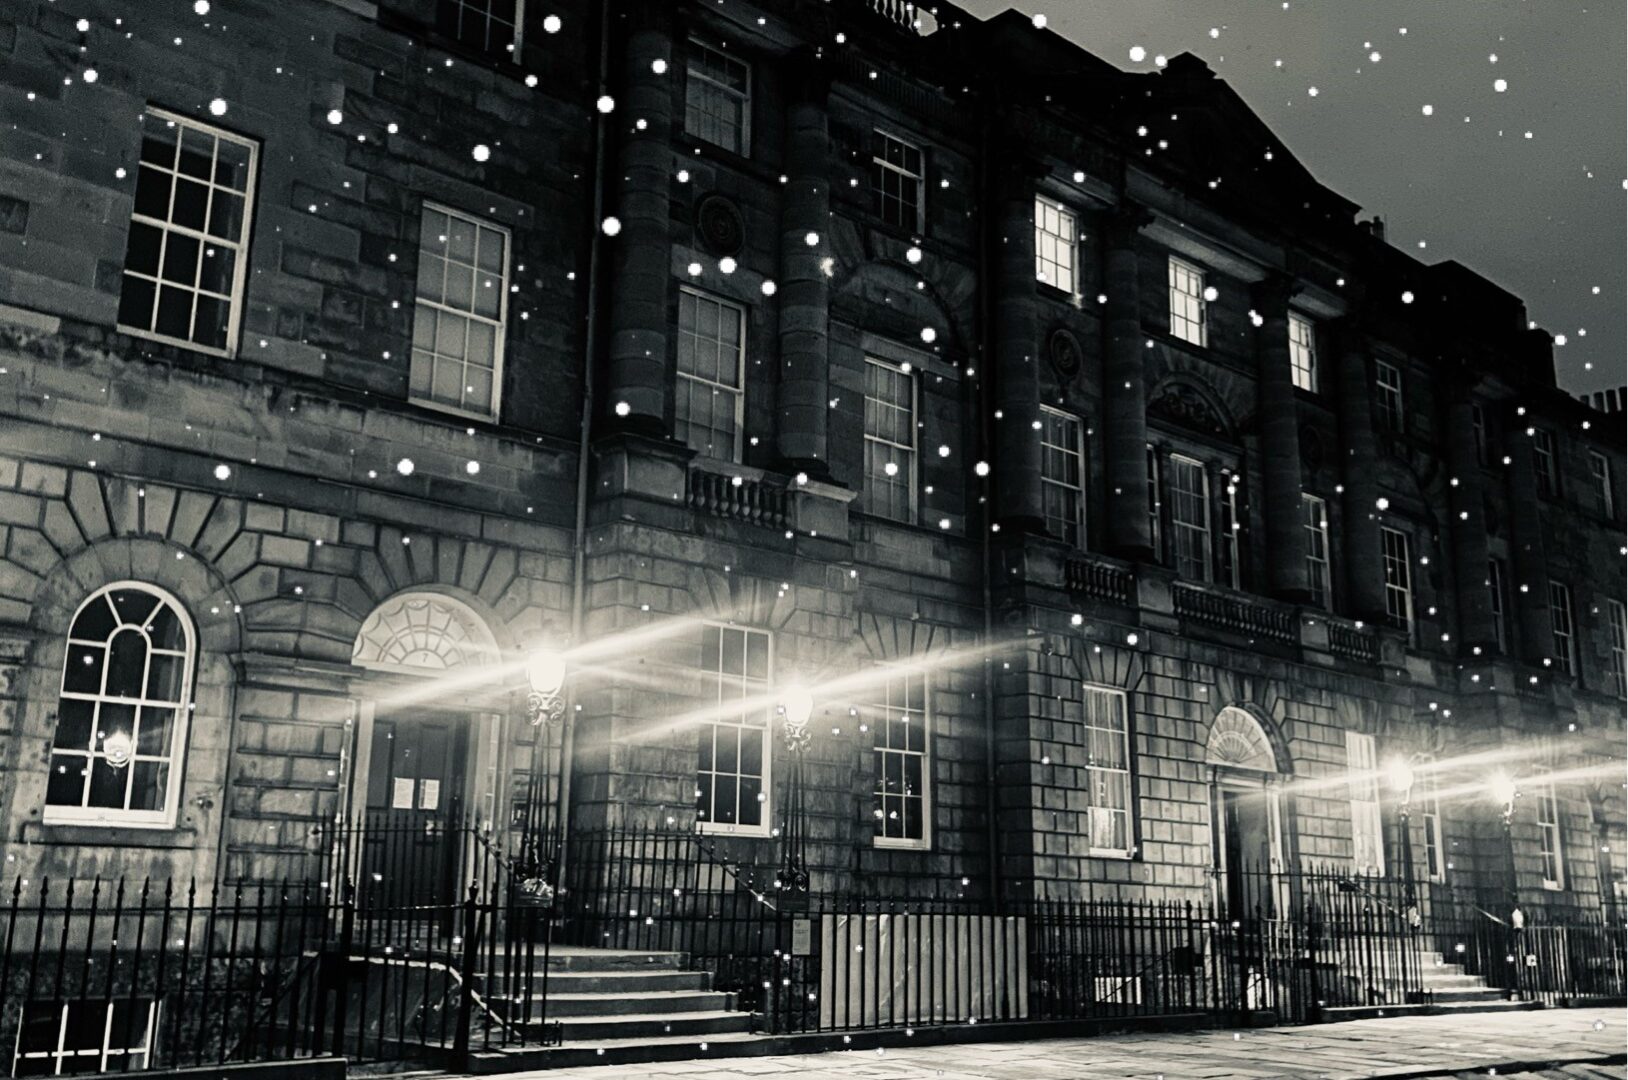 Night time image of a street in Edinburgh with virtually added snow shower